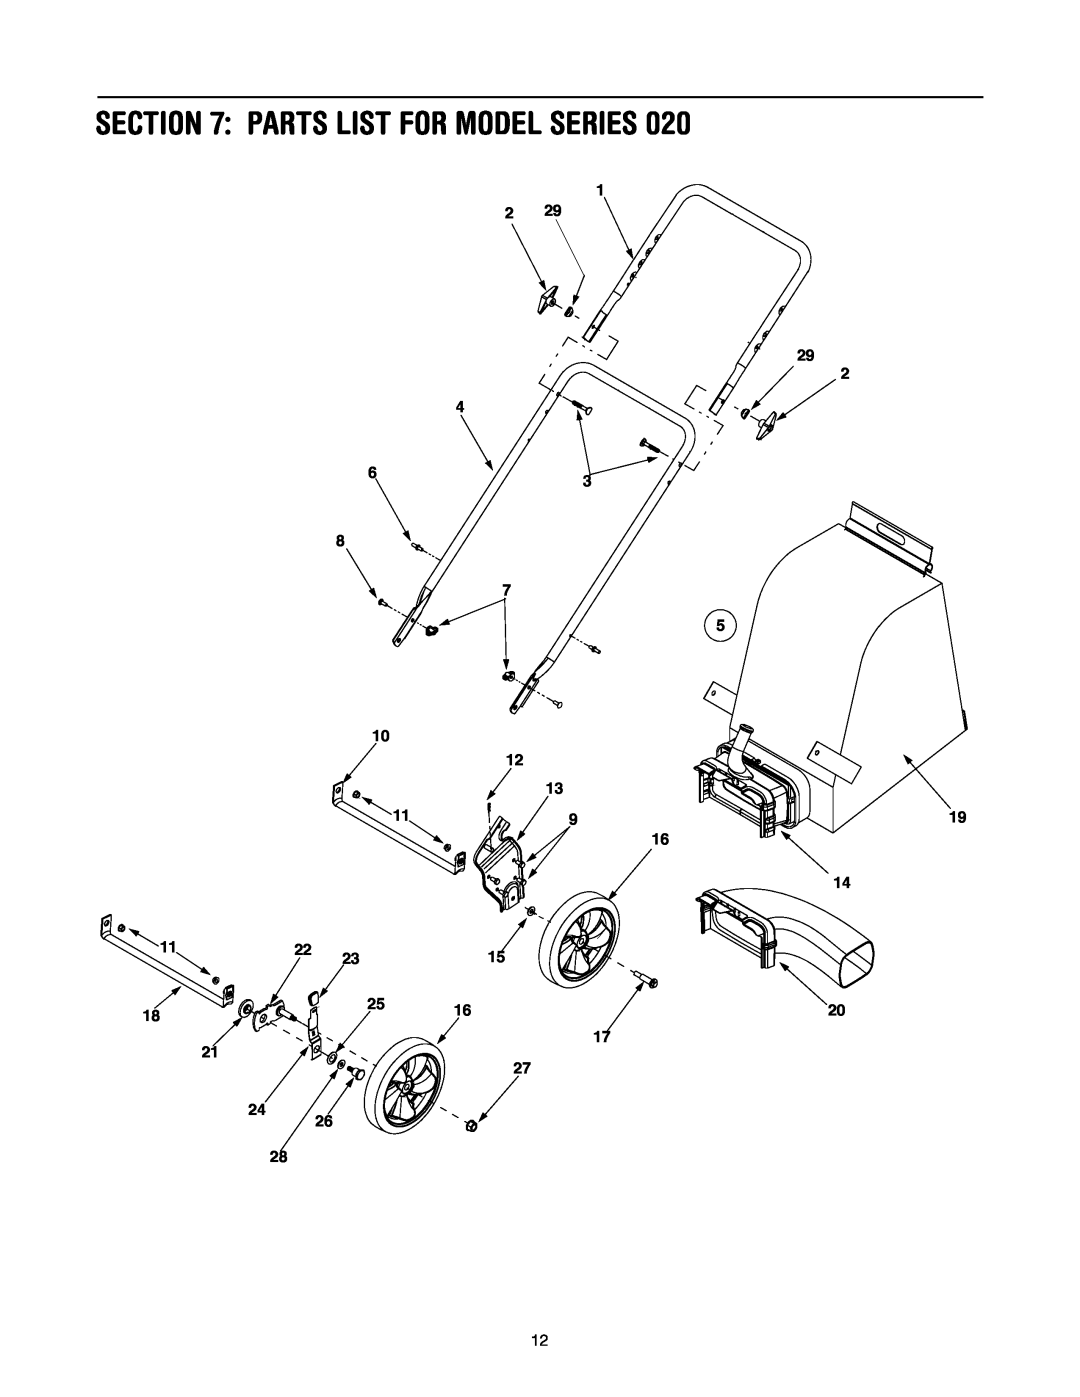 MTD 020 manual Parts List For Model Series 